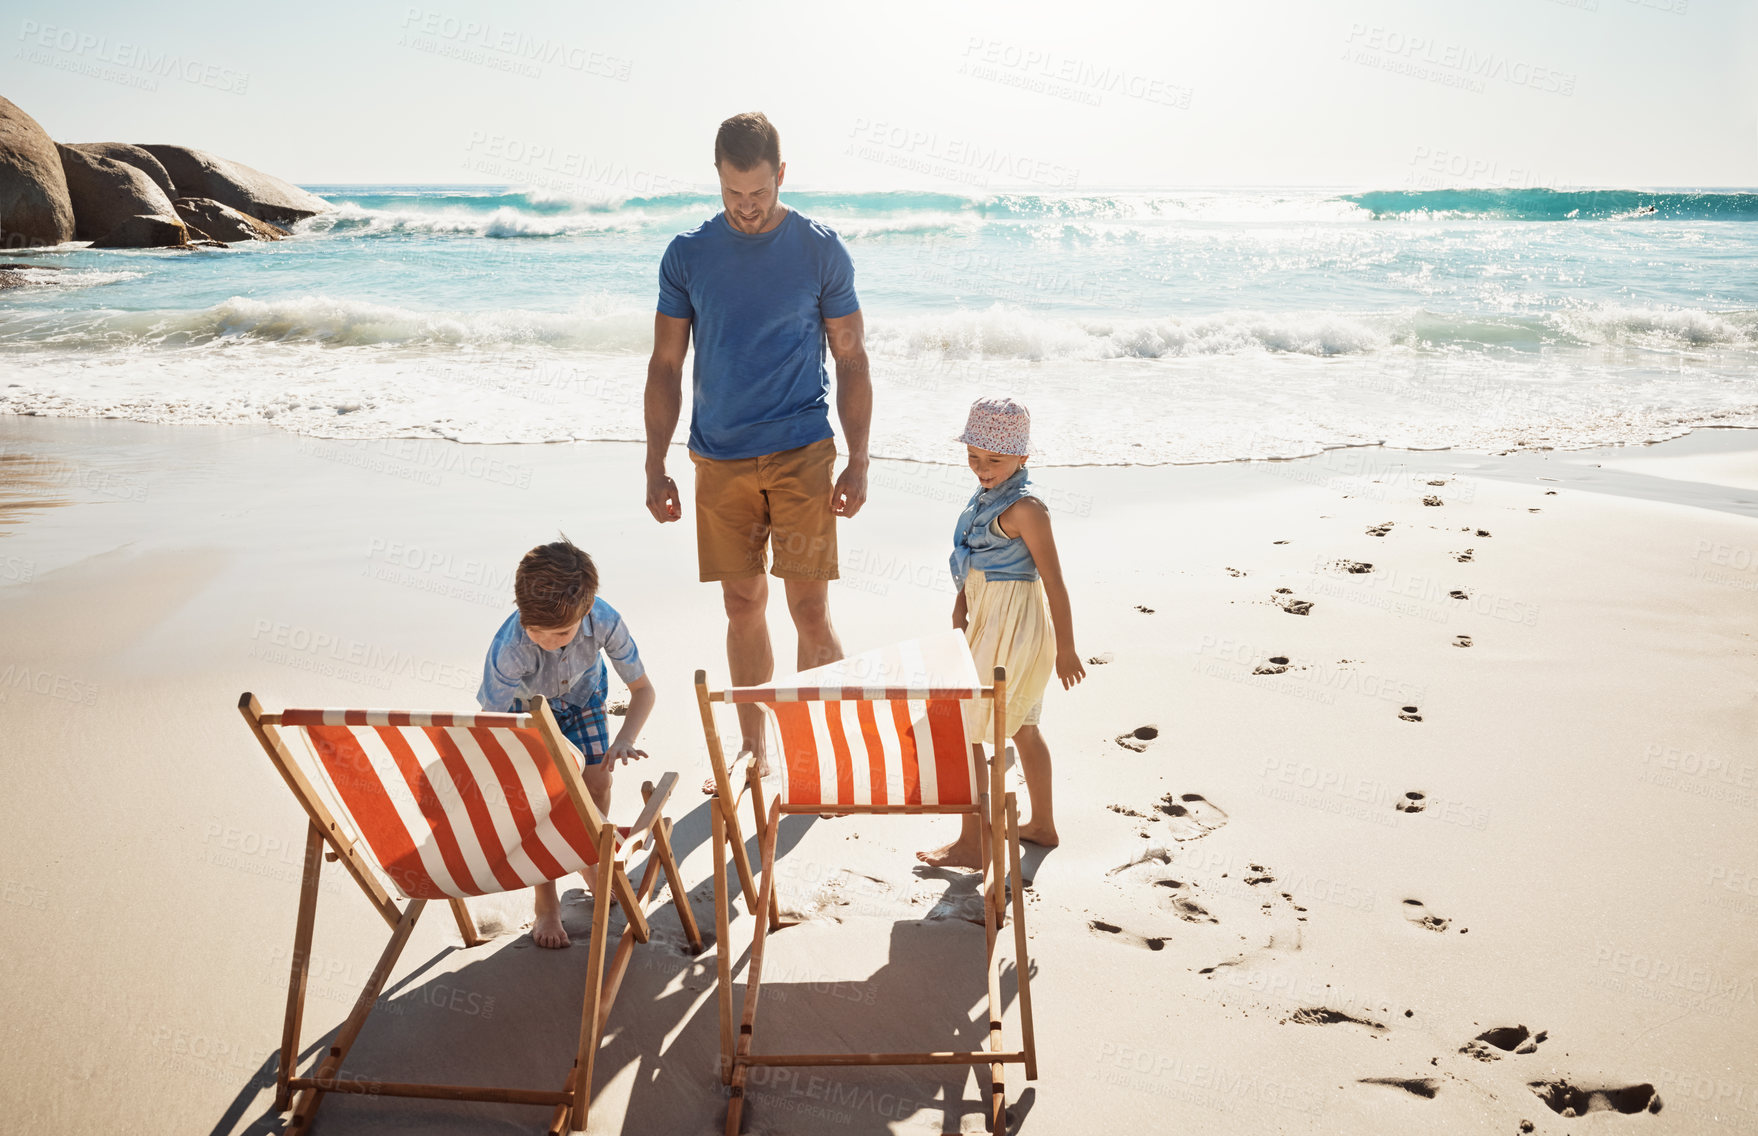 Buy stock photo Shot of a father bonding with his two little children at the beach